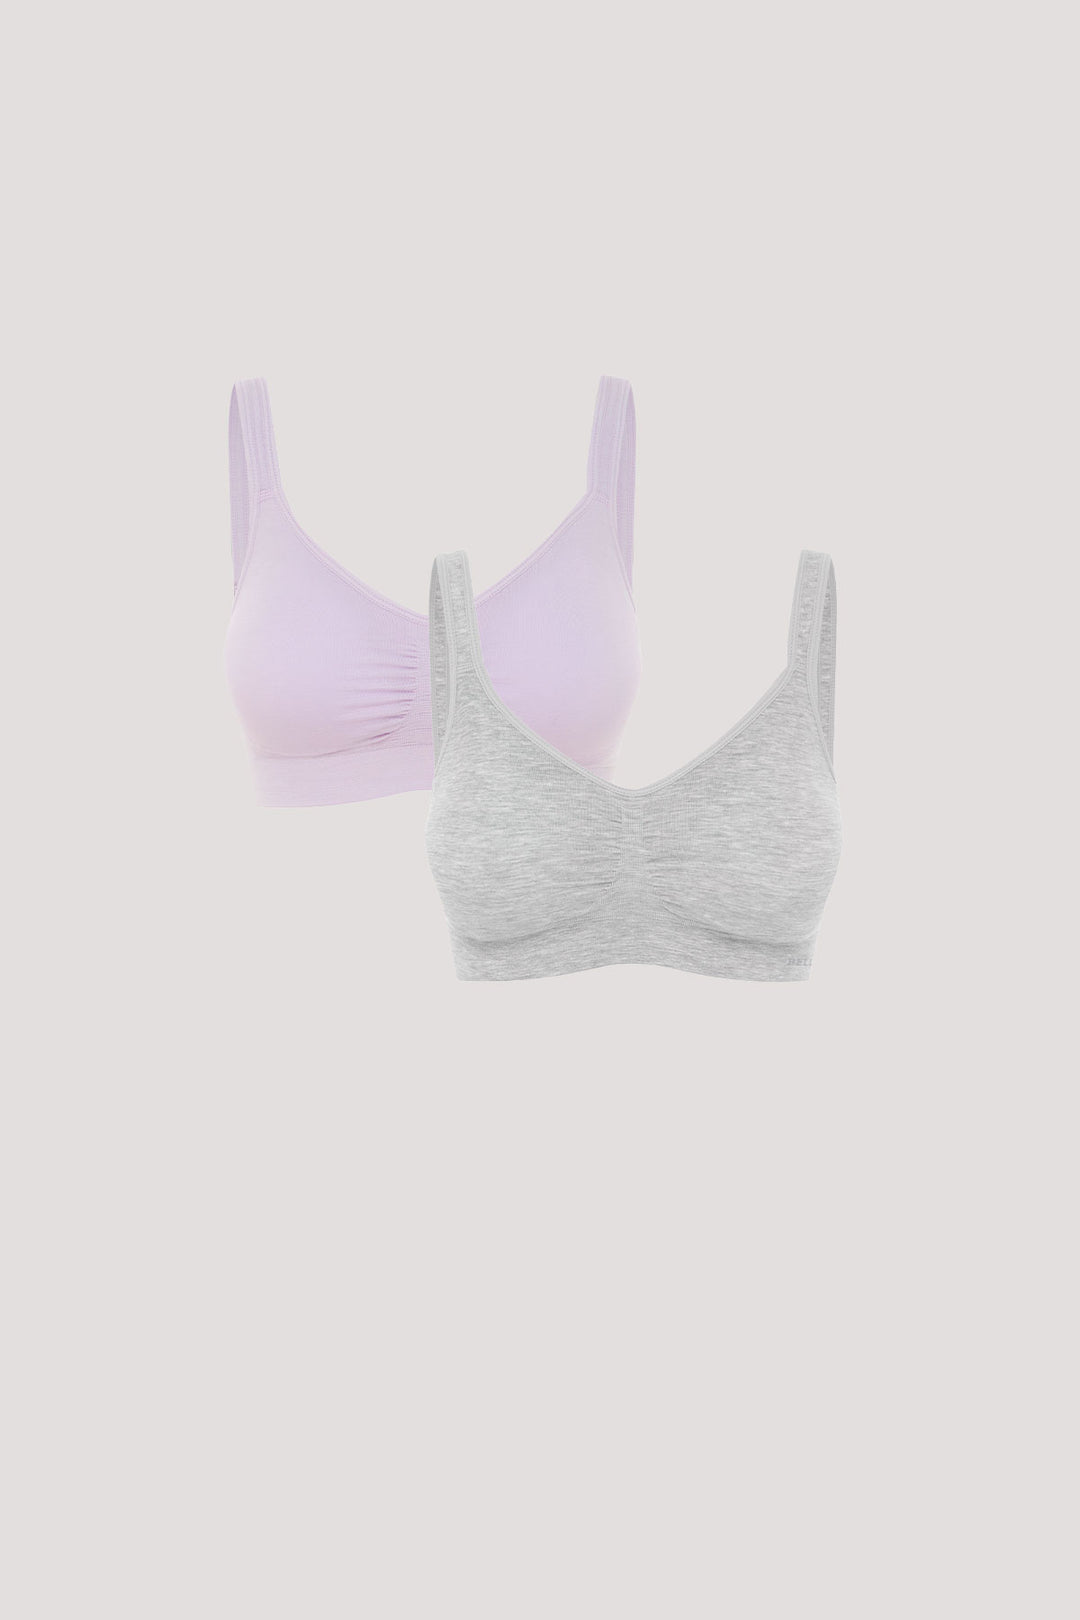 Bamboo Wirefree Bras 2 pack | Adjustable Back Support Bra | Bella Bodies Australia | Grey Marle and Soft Lilac